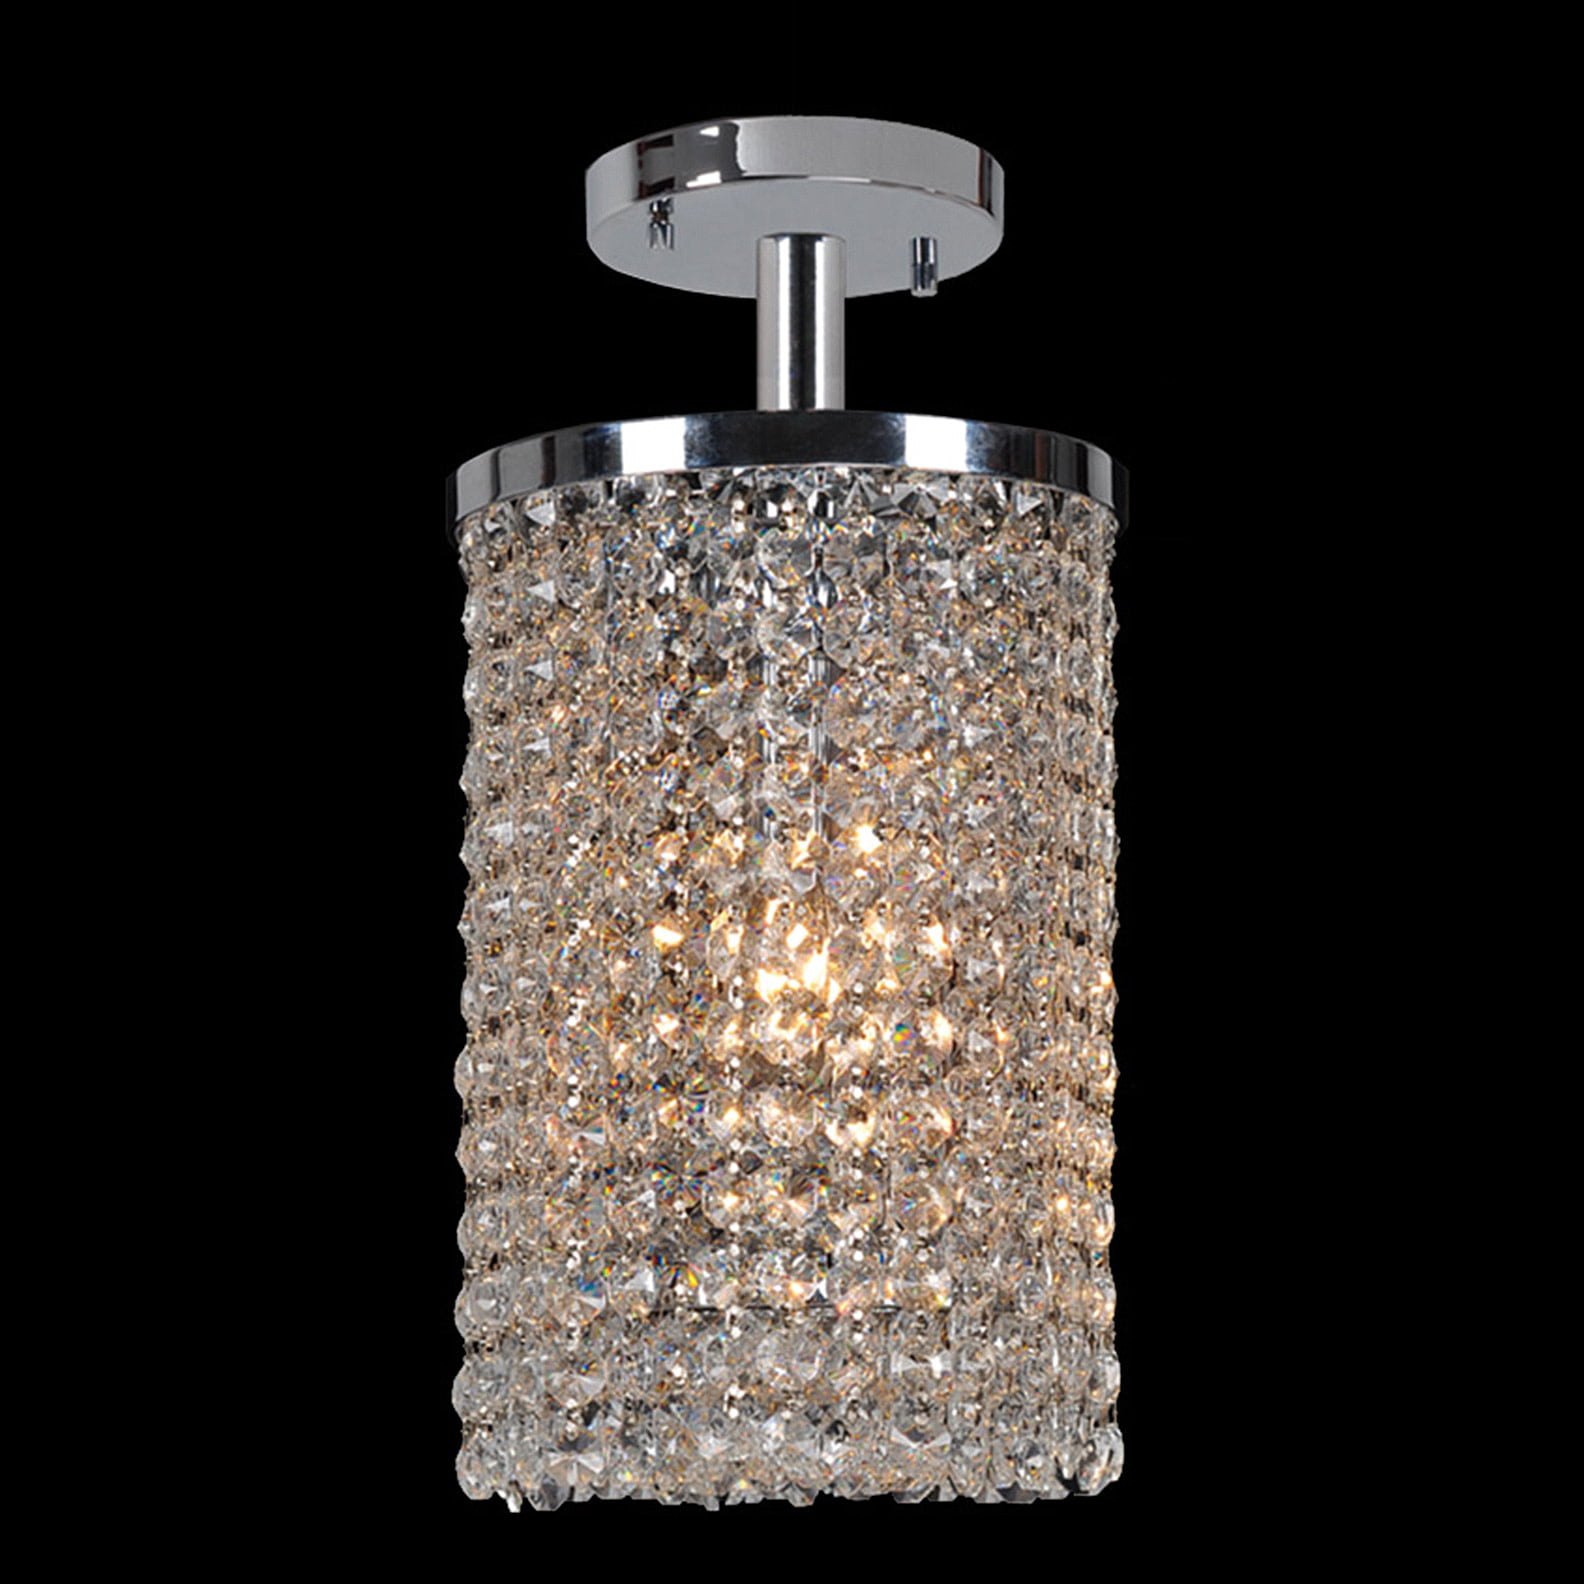 Prism Collection 1 Light Chrome Finish Crystal String Semi Flush Mount Ceiling Light 6" D x 10" H Round Small